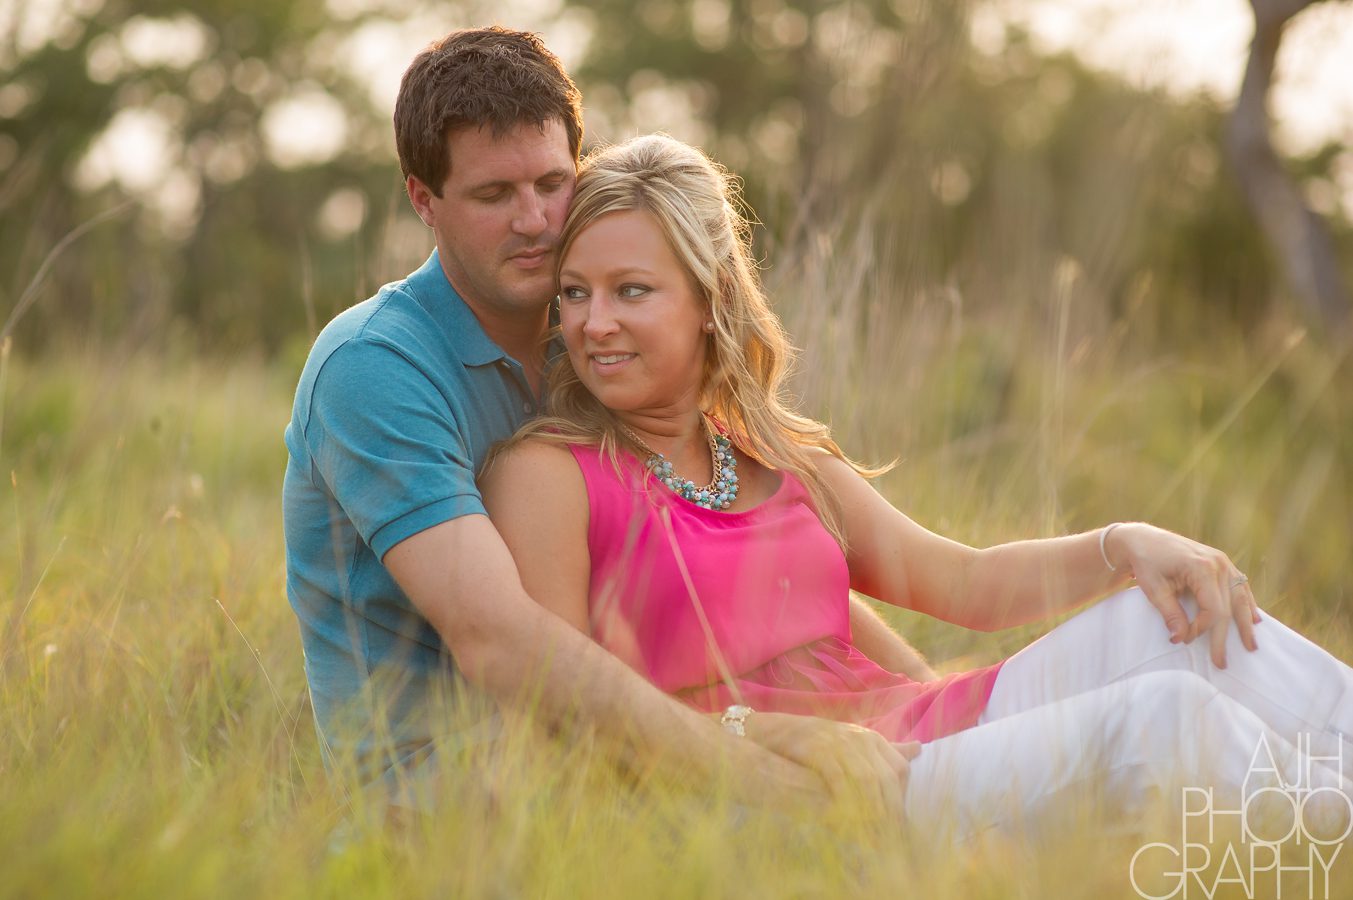 Vista West Ranch Engagement Photography - AJH Photography